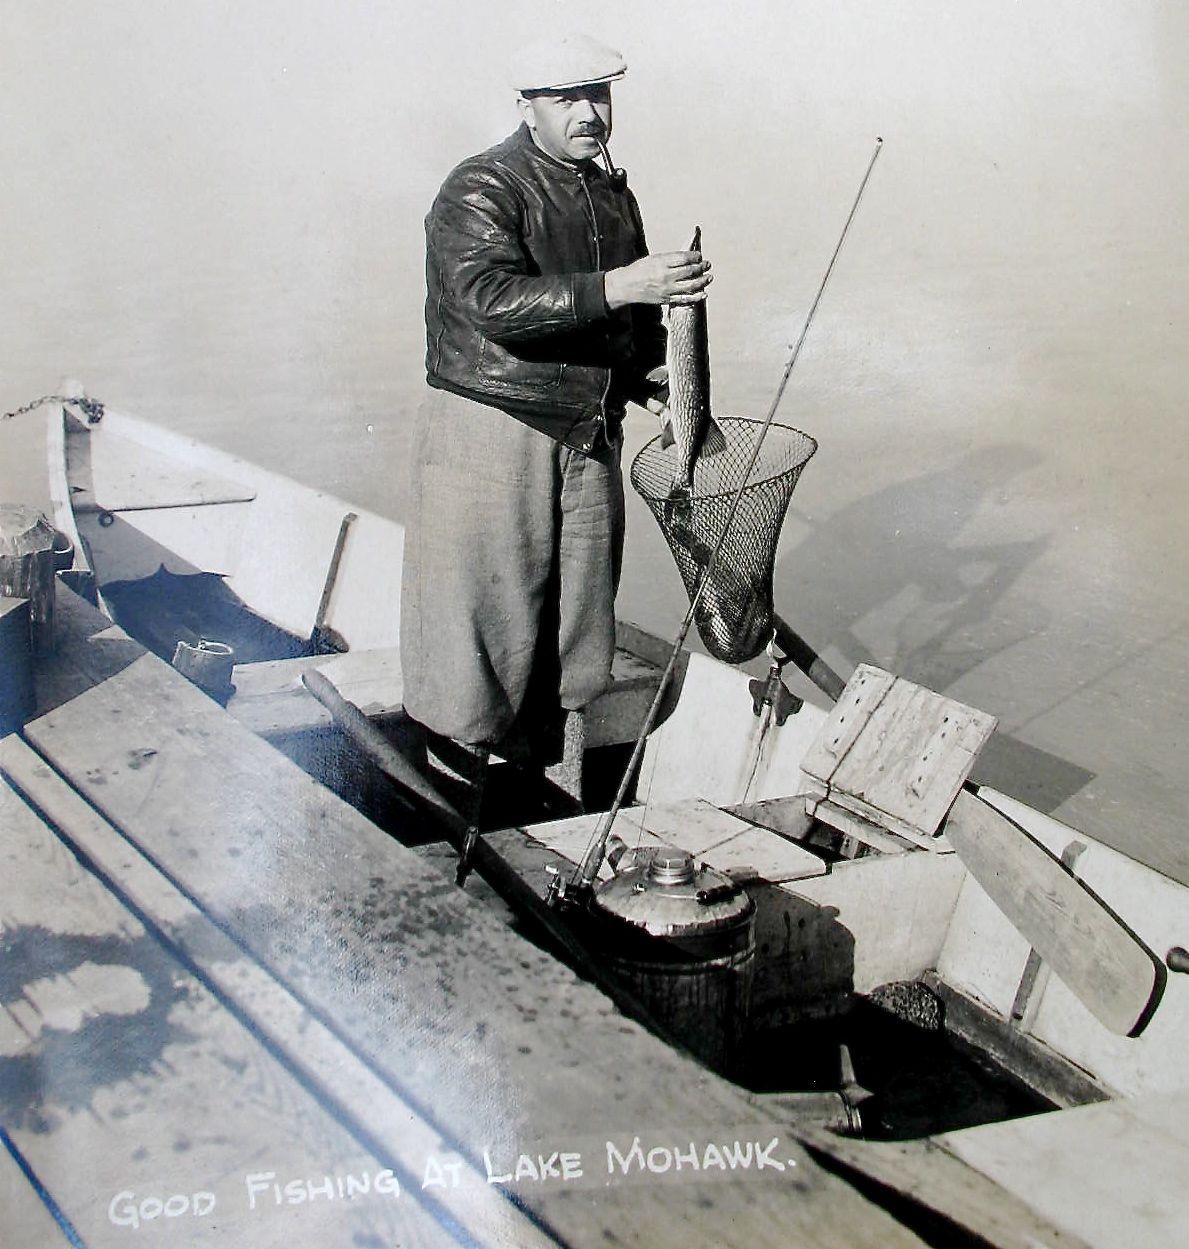 Sparta - Lake Mohawk - A good catch - A man afish in a boat at the dock - c 1930